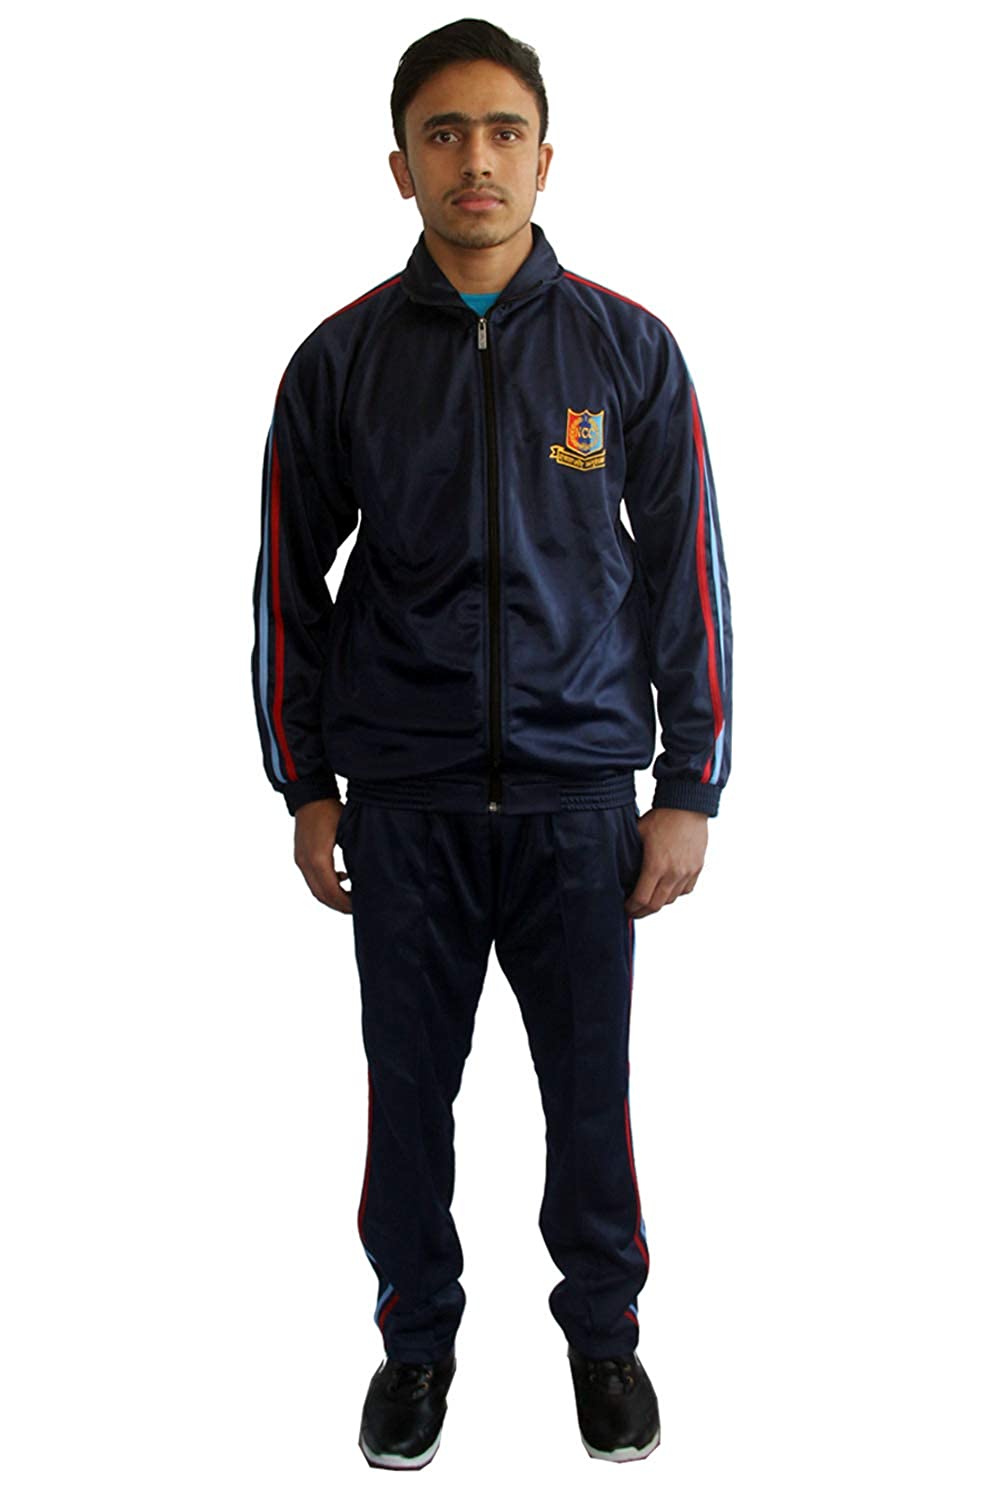 army tracksuit - Military Tracksuit Price Starting From Rs 400/Set. Find  Verified Sellers in Mysore - JdMart